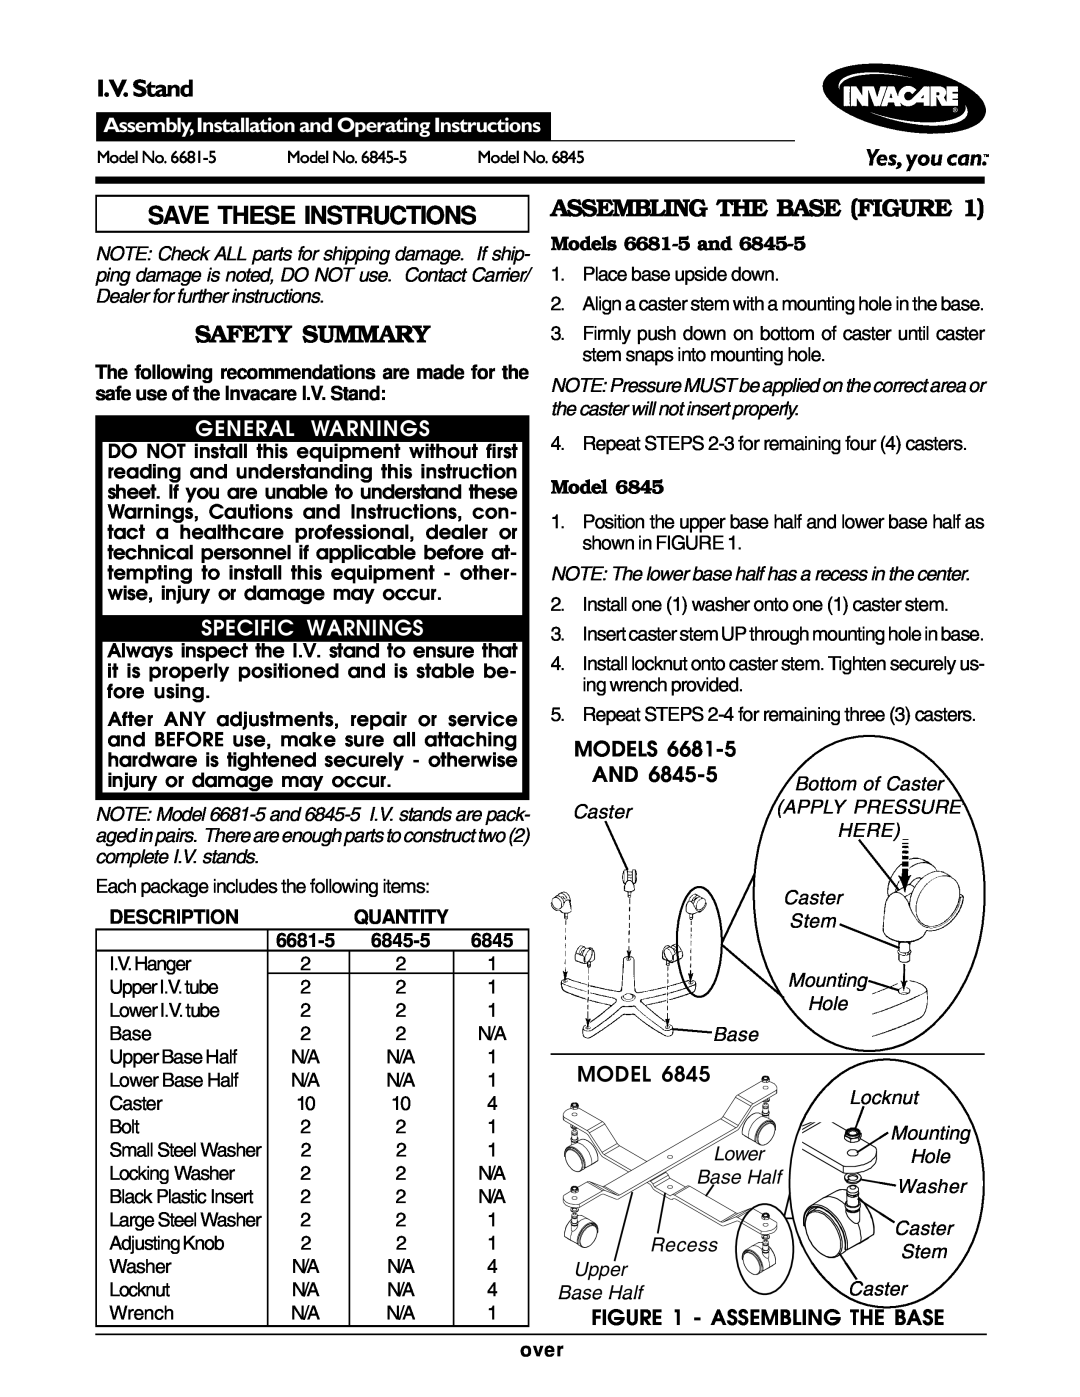 Invacare 6845-5 operating instructions Safety Summary, Assembling The Base Figure, Description, 6681-5, over, I.V. Stand 